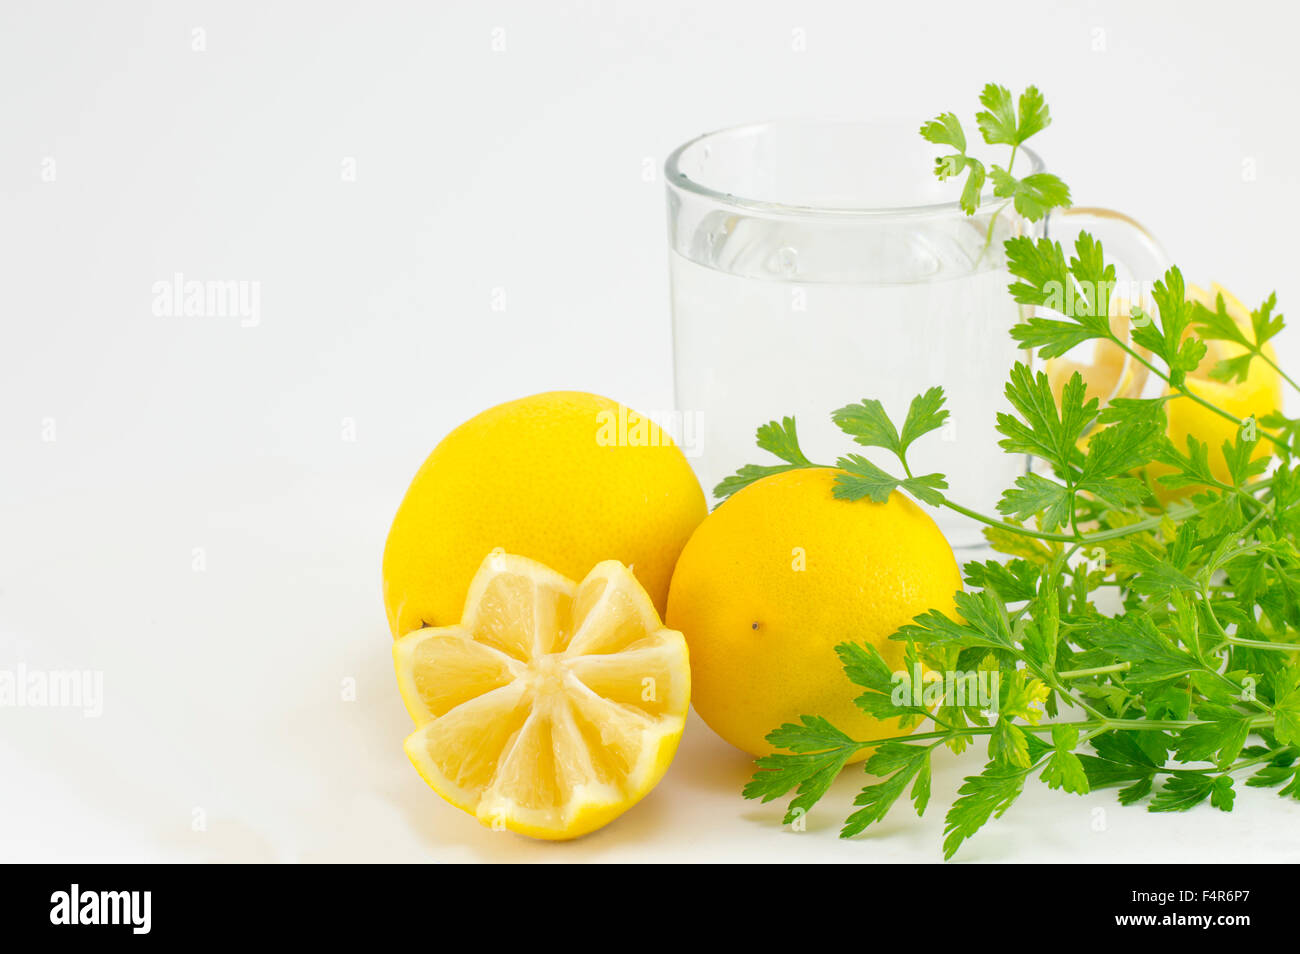 Decorative lemons, parsley and glass of water. Healthy lifestyle abstract Stock Photo